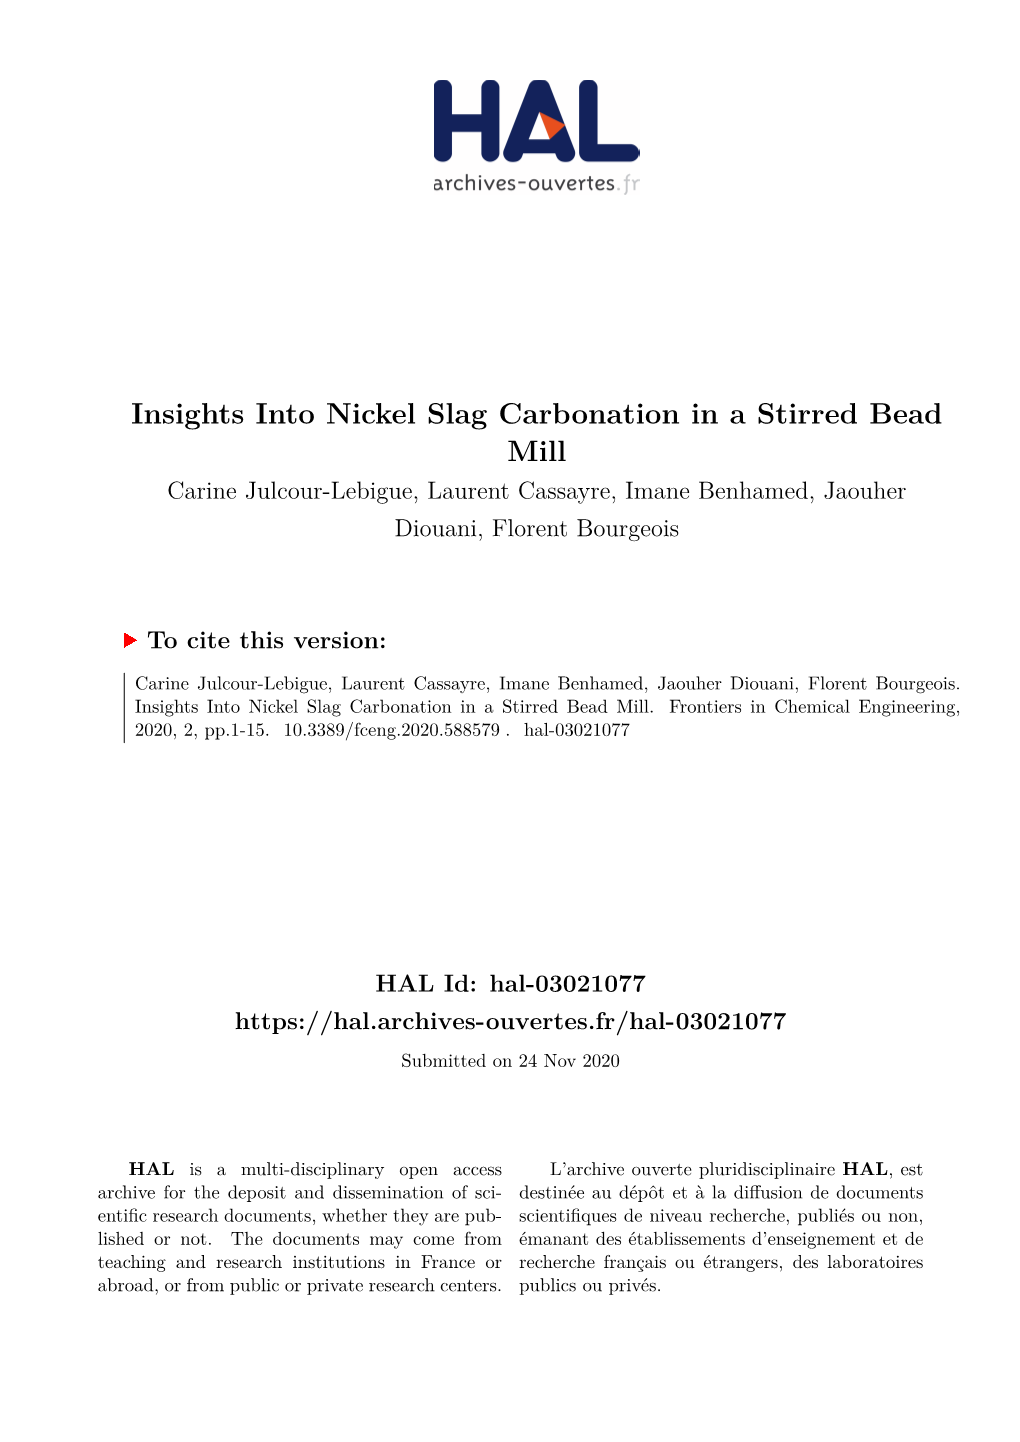 Insights Into Nickel Slag Carbonation in a Stirred Bead Mill Carine Julcour-Lebigue, Laurent Cassayre, Imane Benhamed, Jaouher Diouani, Florent Bourgeois